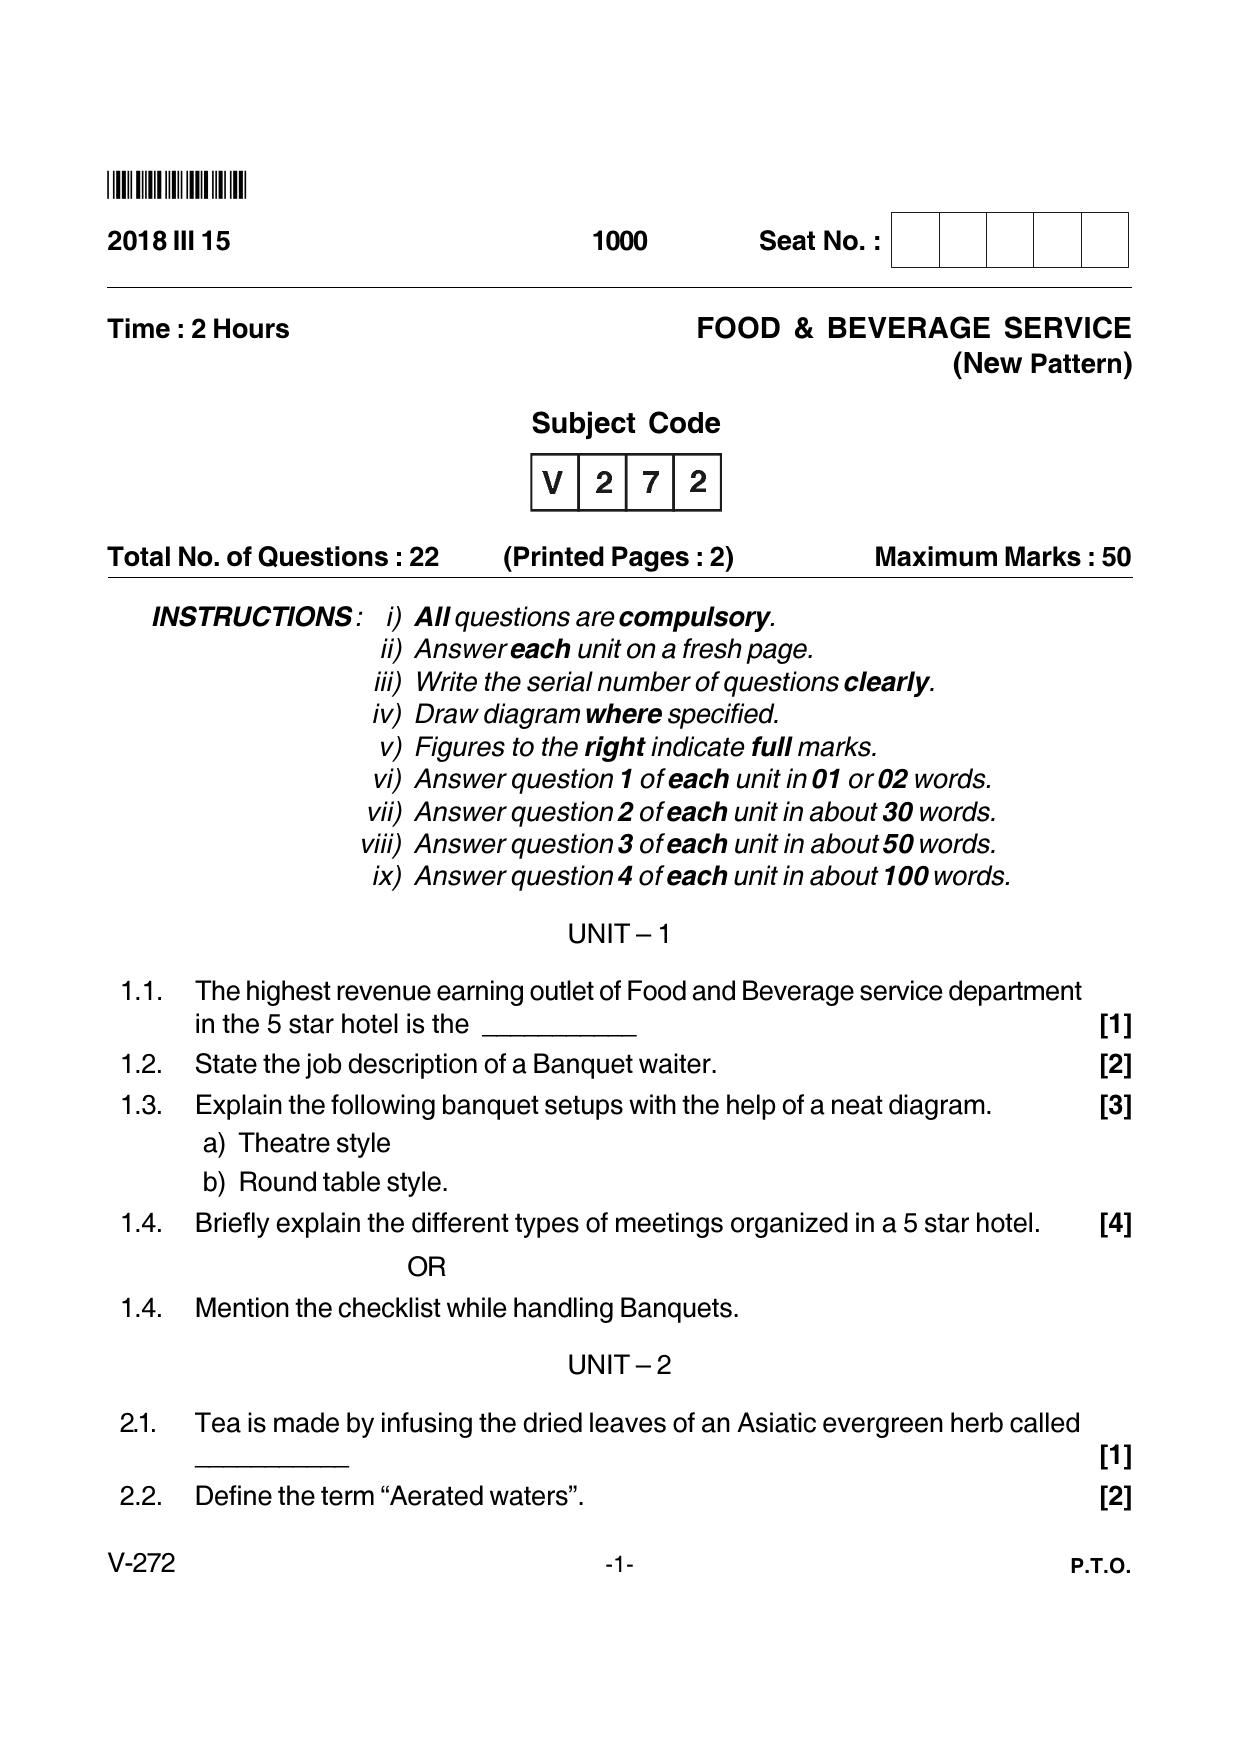 Goa Board Class 12 Food & Beverage Service  Voc 272 New Pattern (March 2018) Question Paper - Page 1